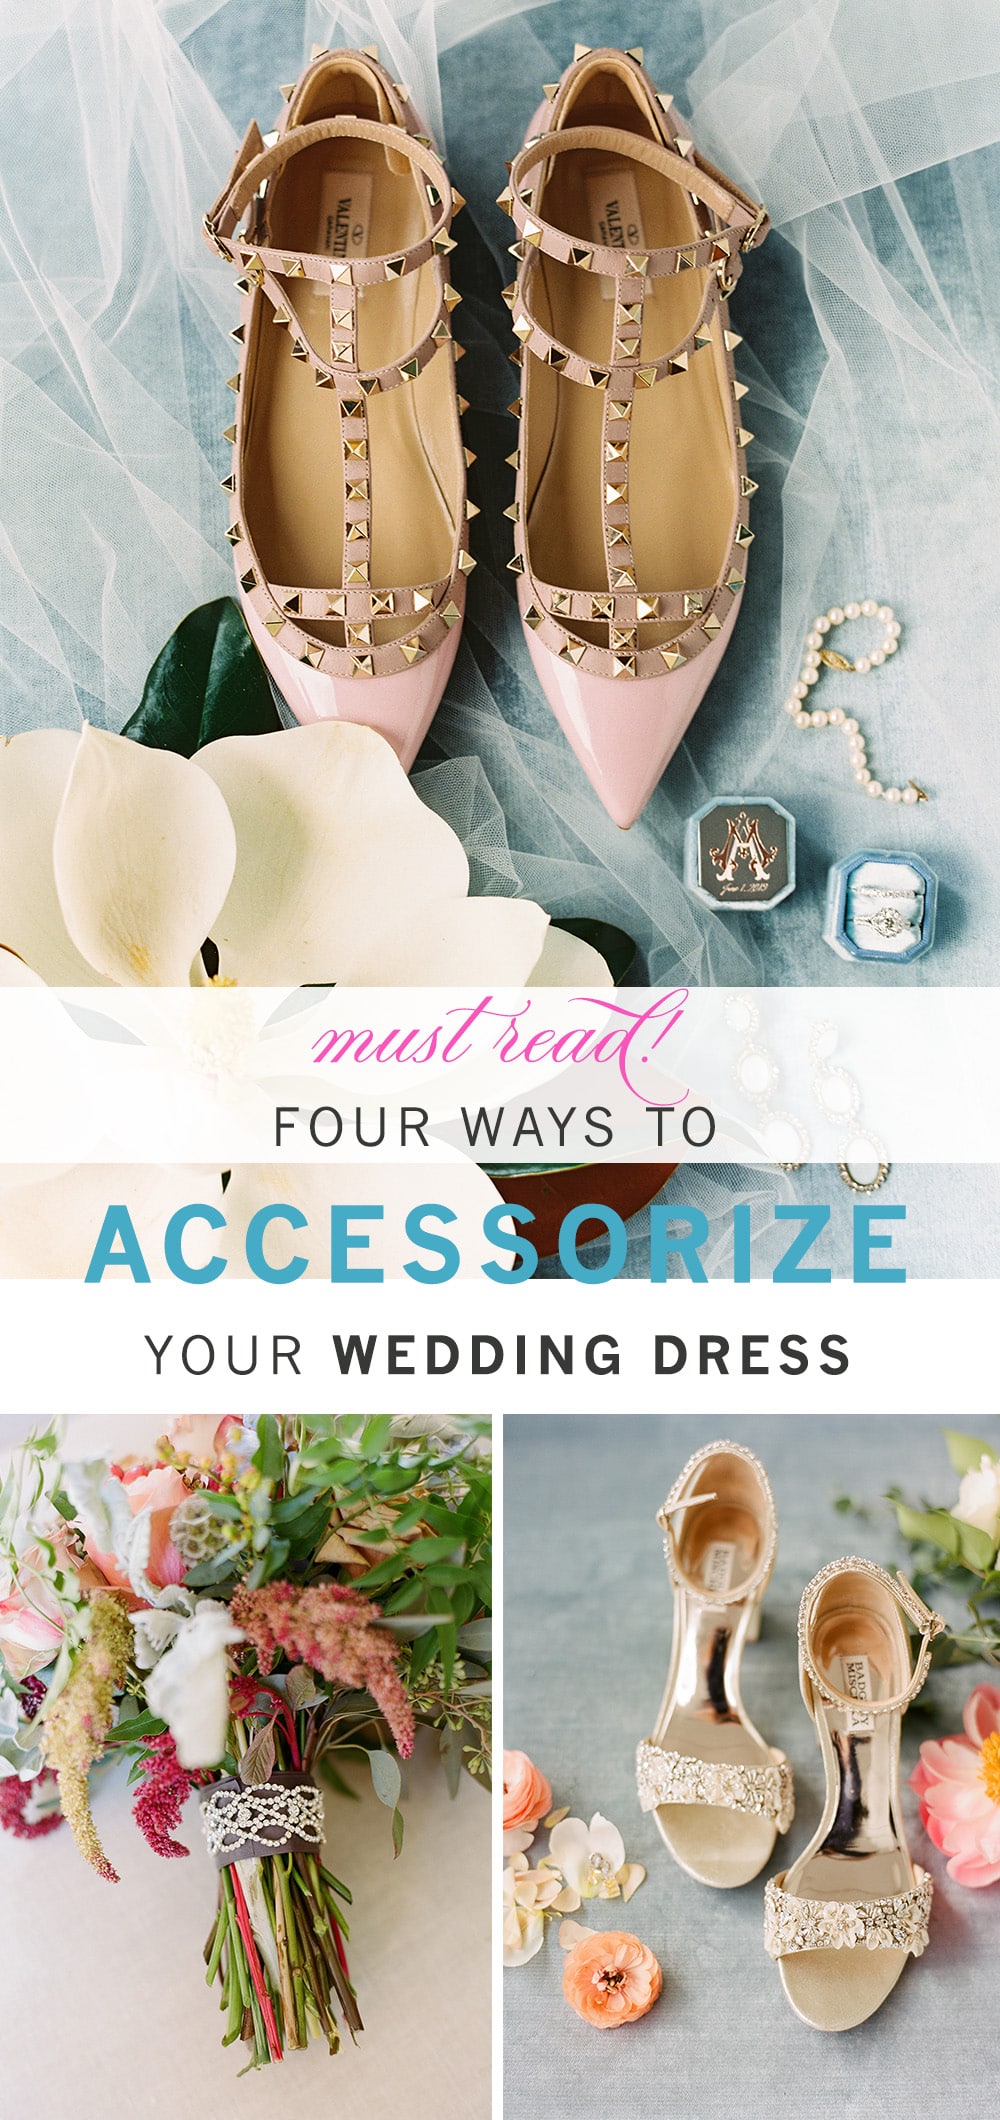 http://wineandcountryweddings.com/wp-content/uploads/2020/03/Four-Ways-to-Accessorize-Your-Wedding-Dress-Pinterest-3.jpg